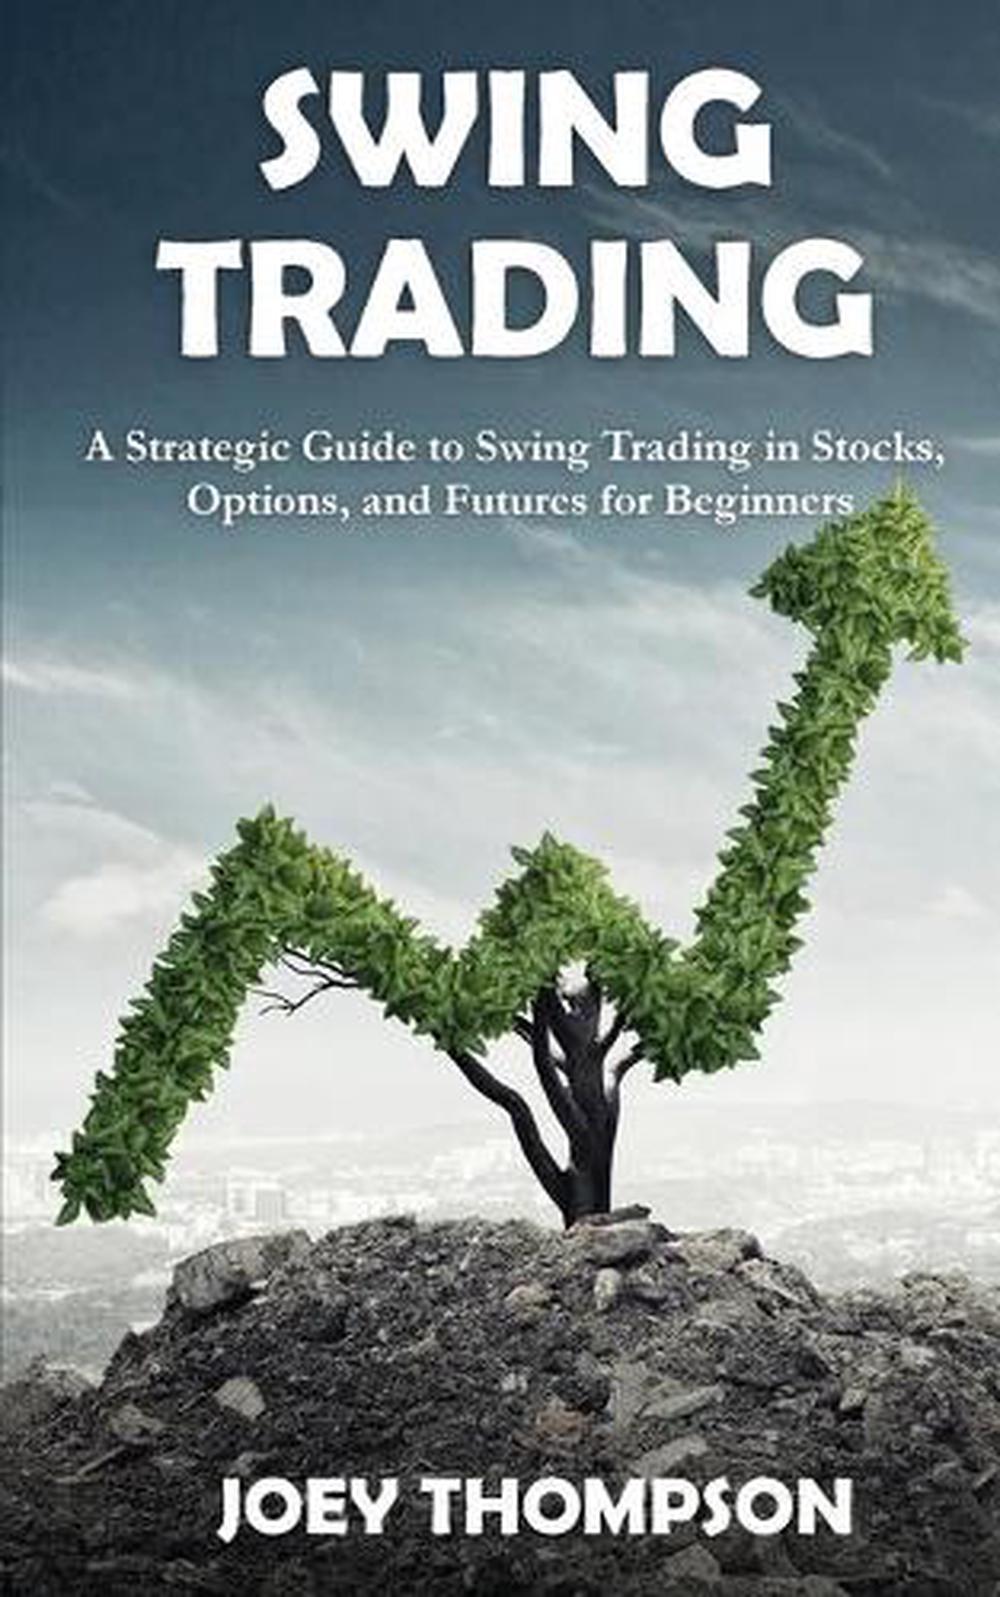 Swing Trading: A Strategic Guide to Swing Trading in Stocks, Options